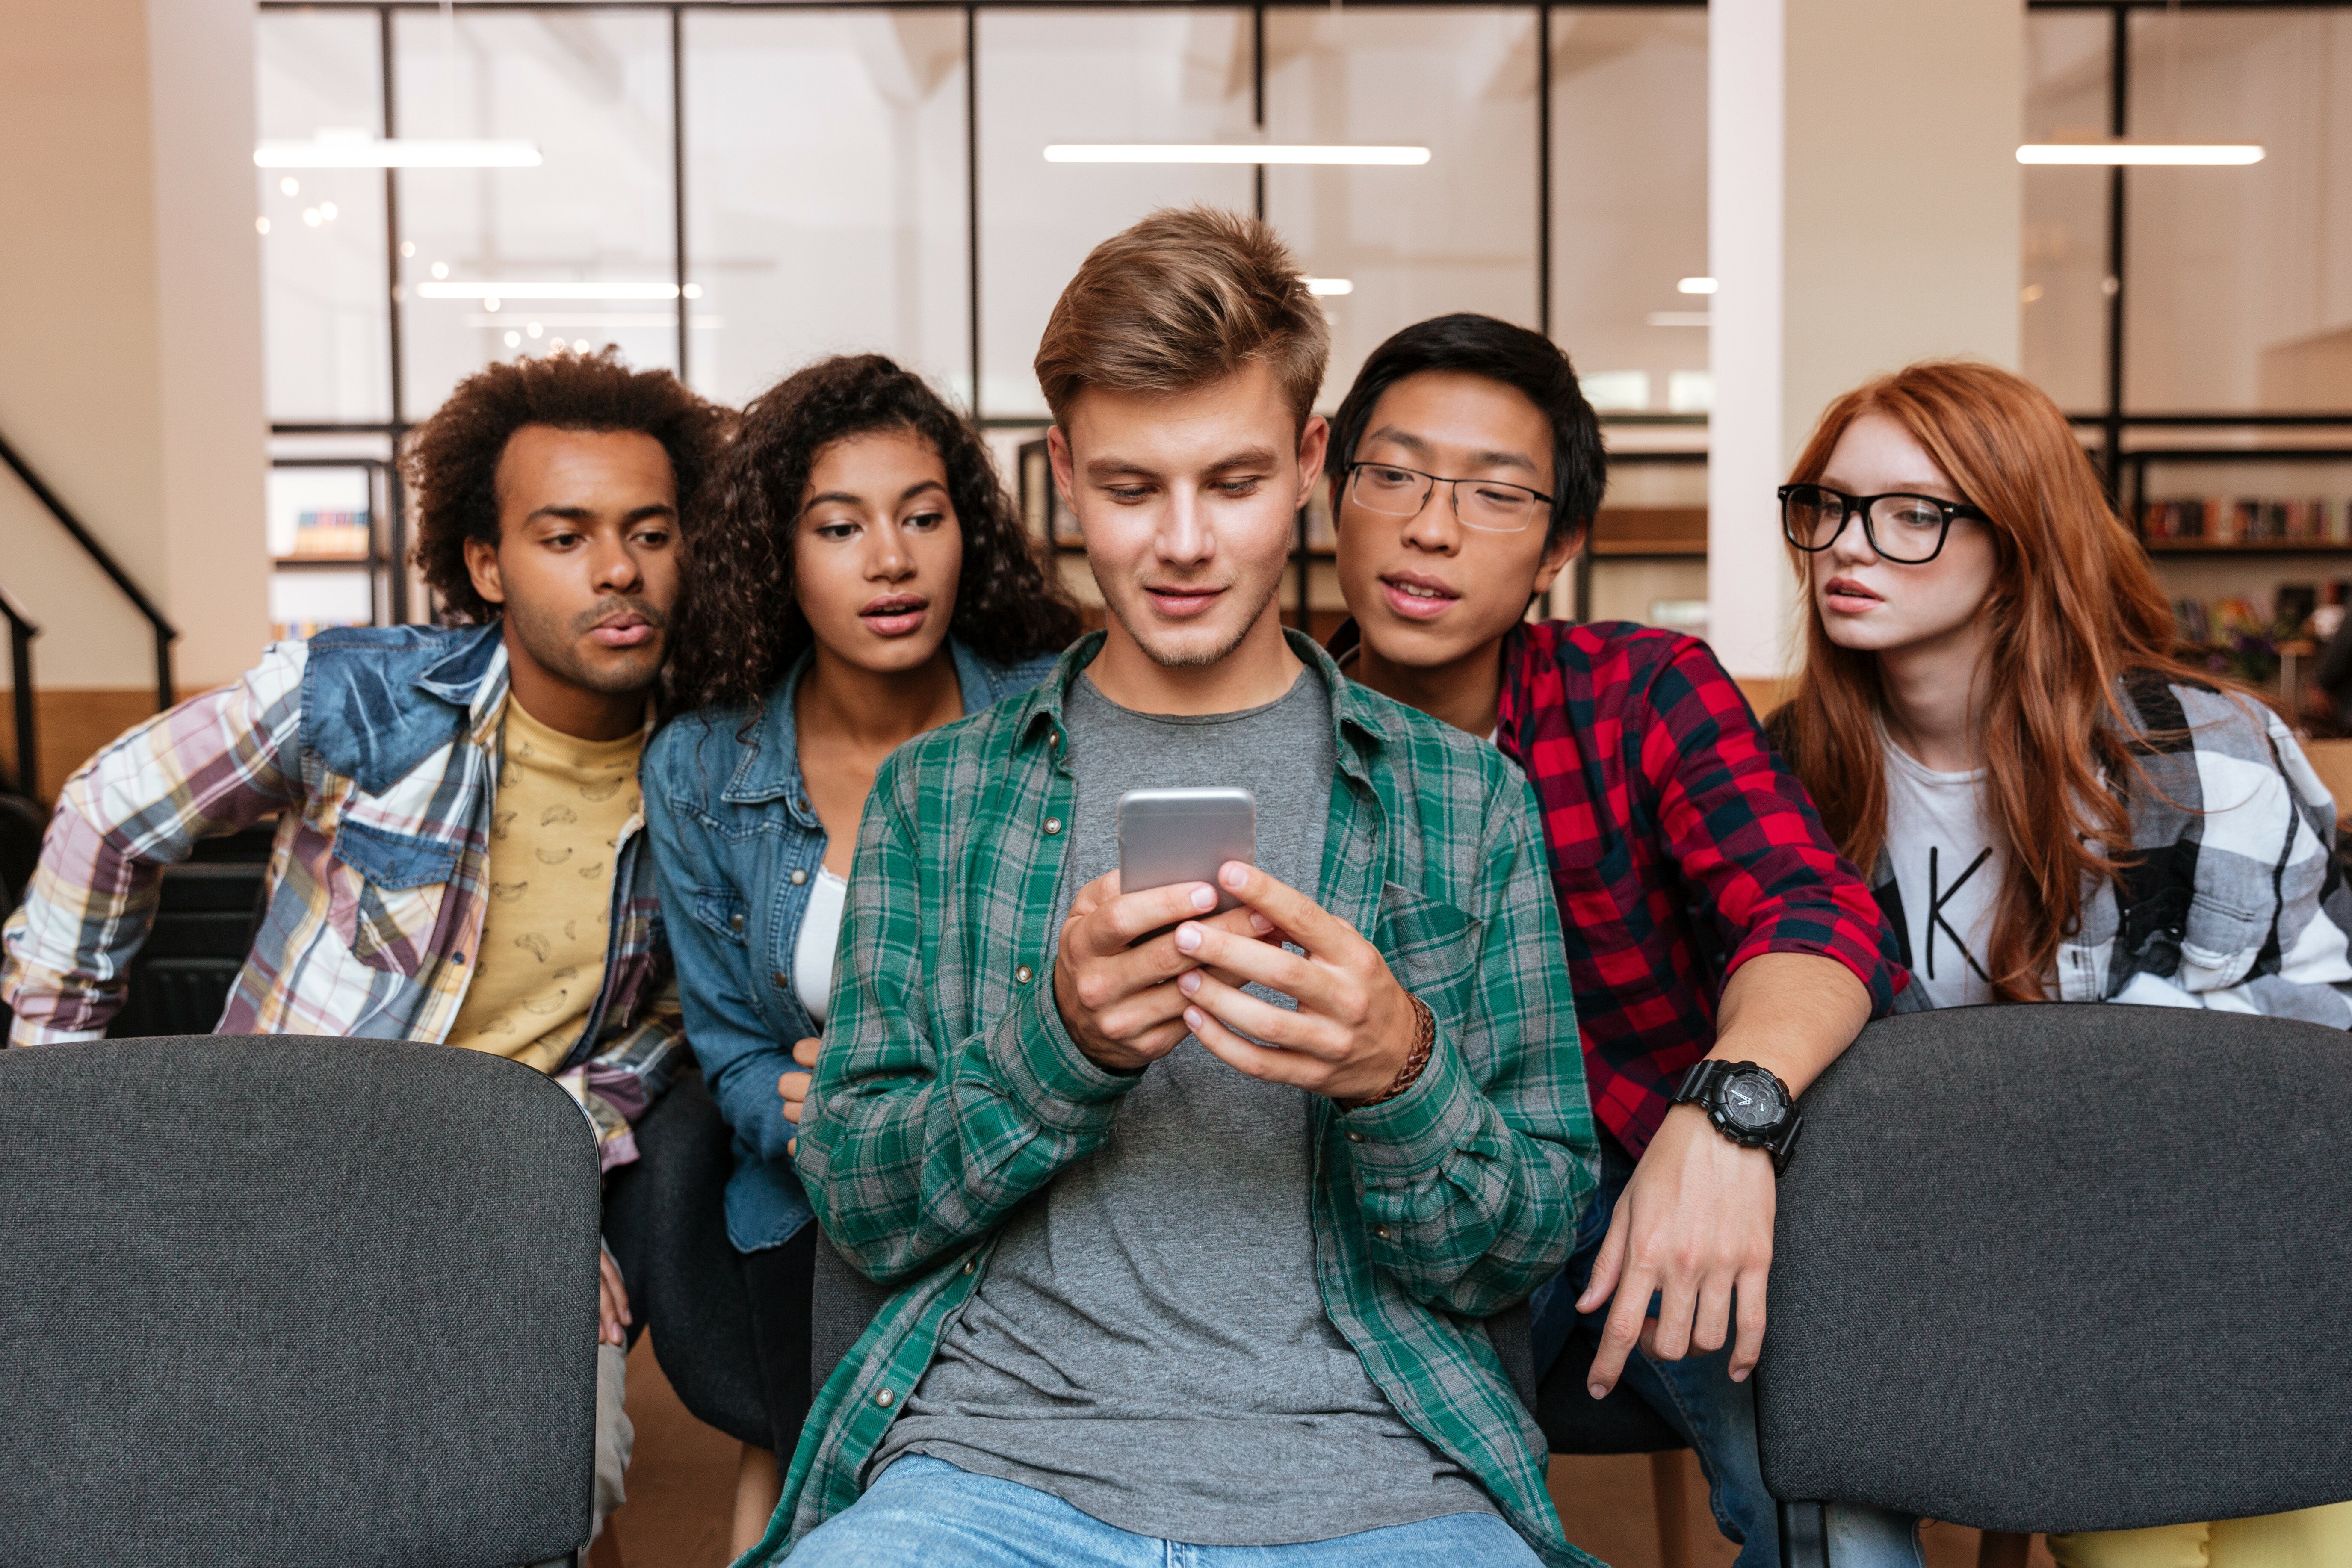 Cover image for  article: Understanding Gen Z and Millennials with ViacomCBS' Wired for Mobile Study